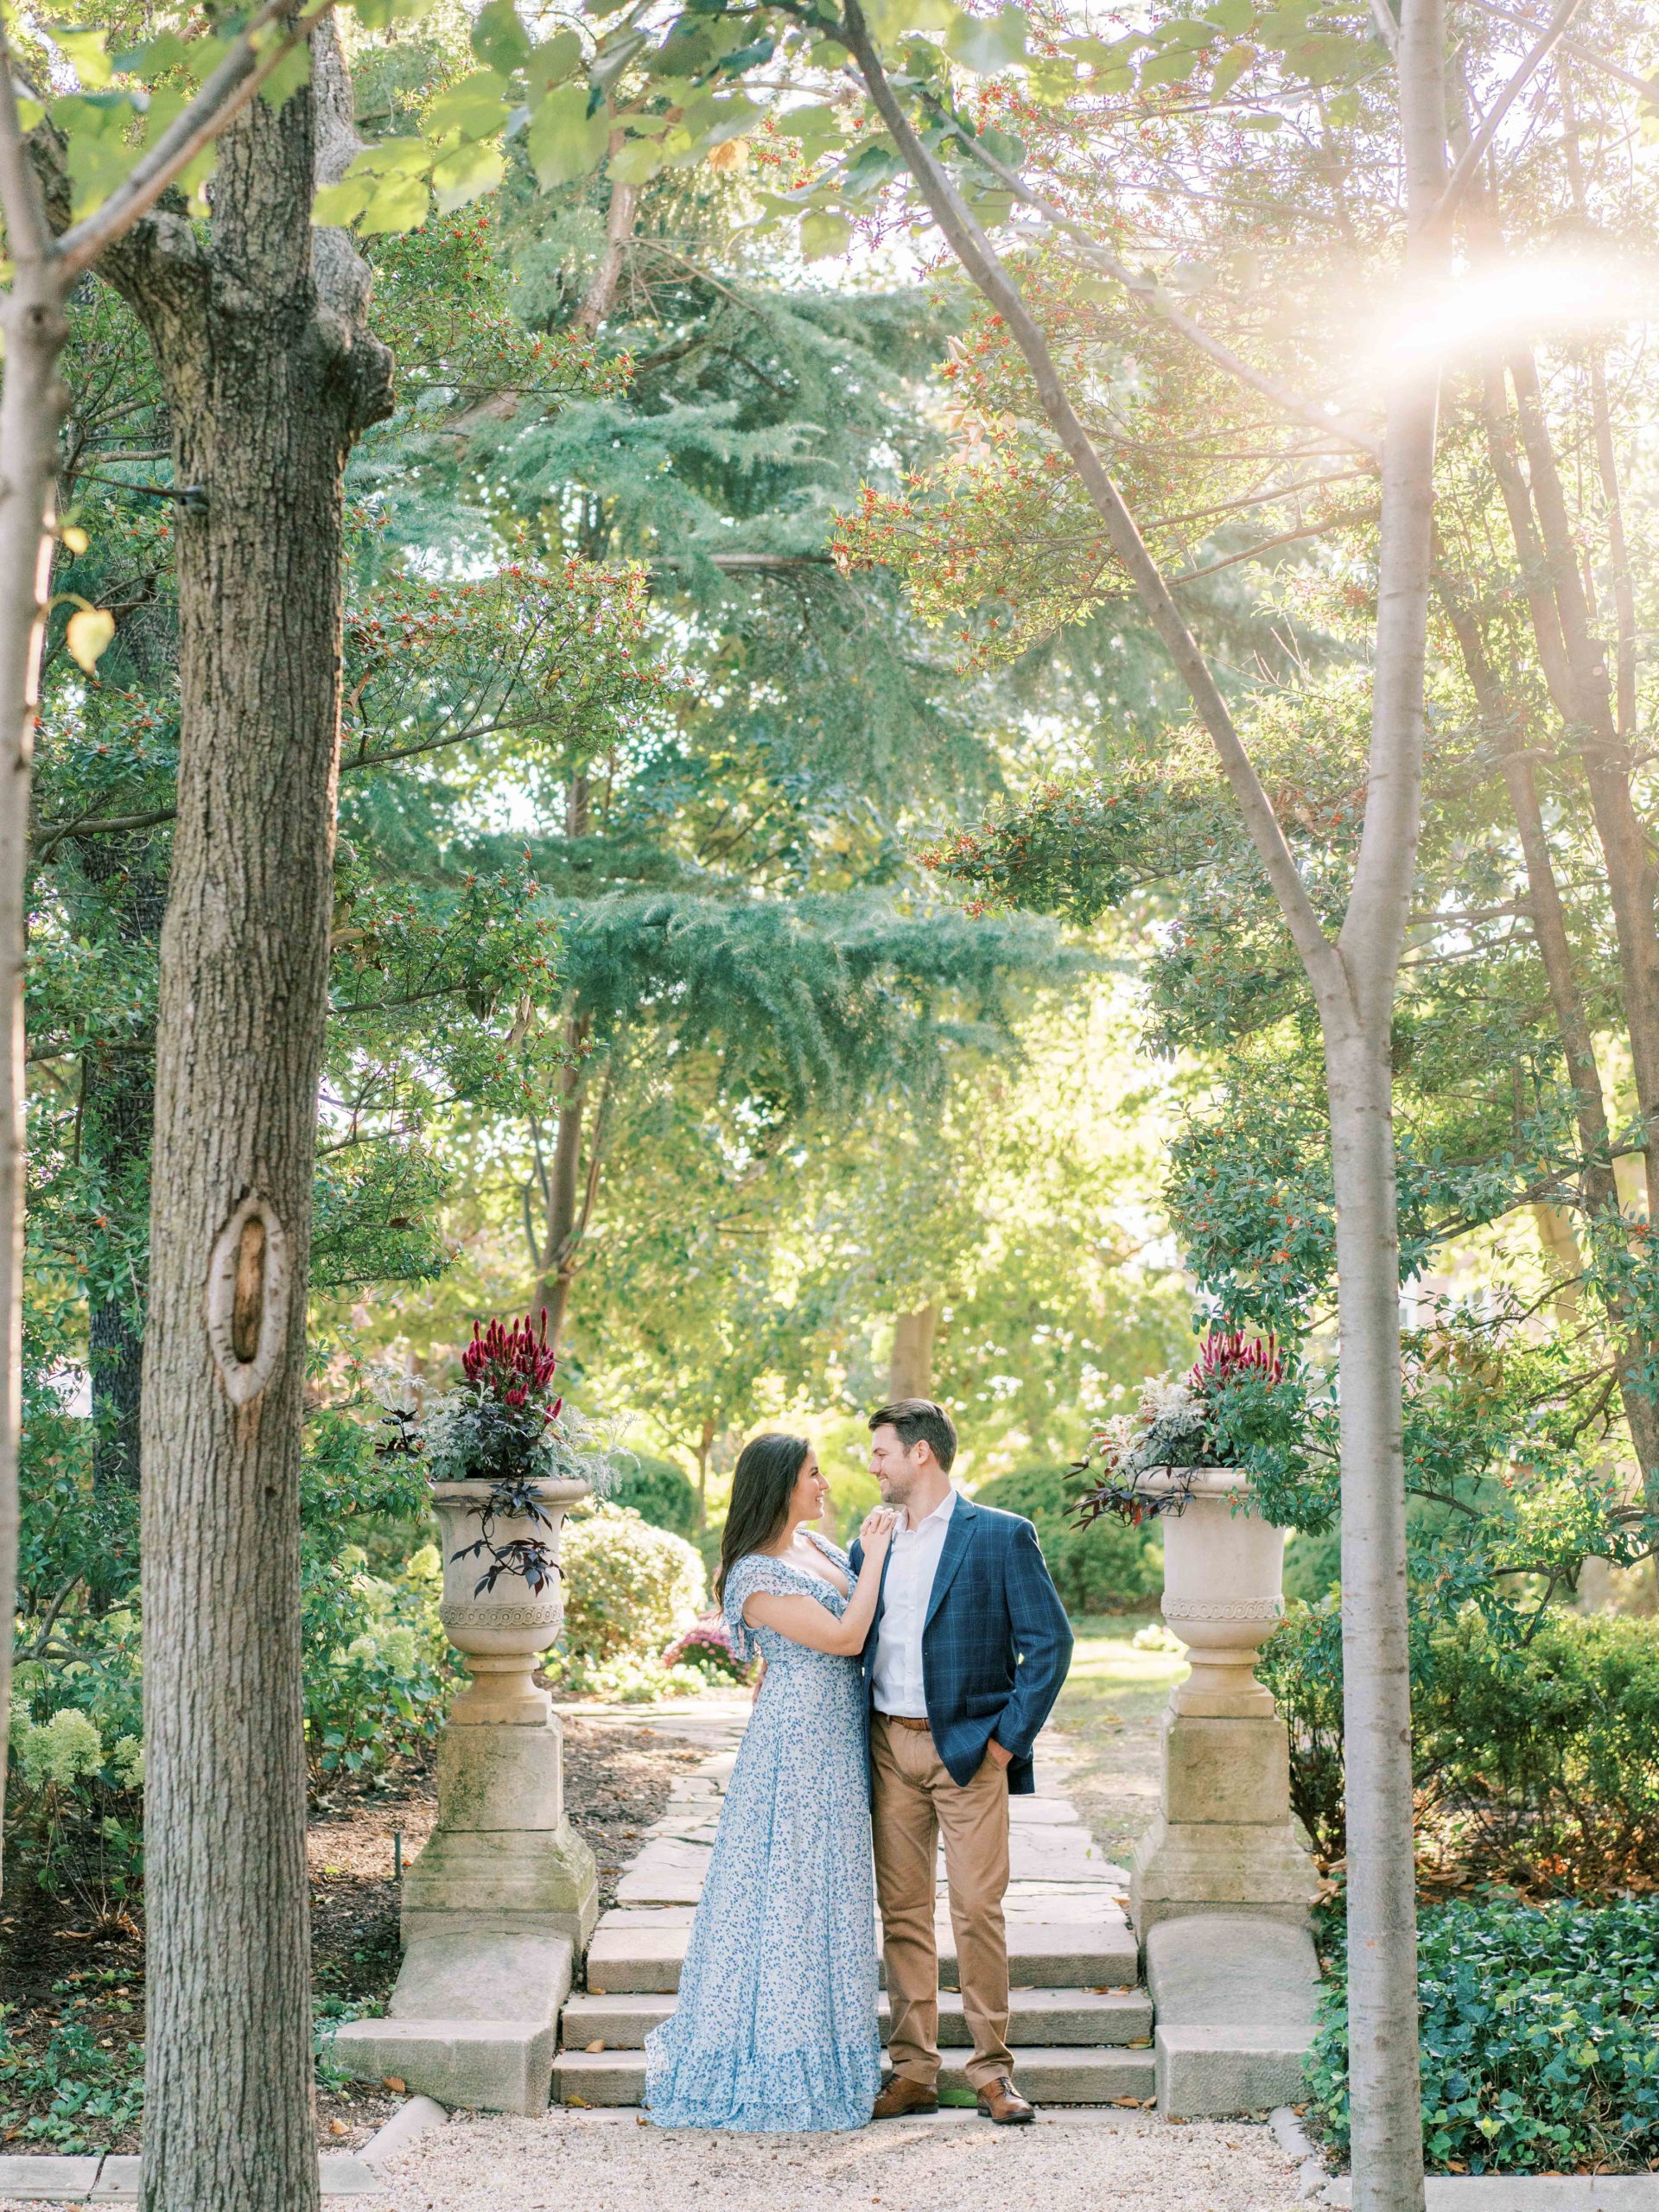 A stunning engagement session at the Meridian House in downtown Washington, DC. Captured by DC film photographer, Alicia Lacey.